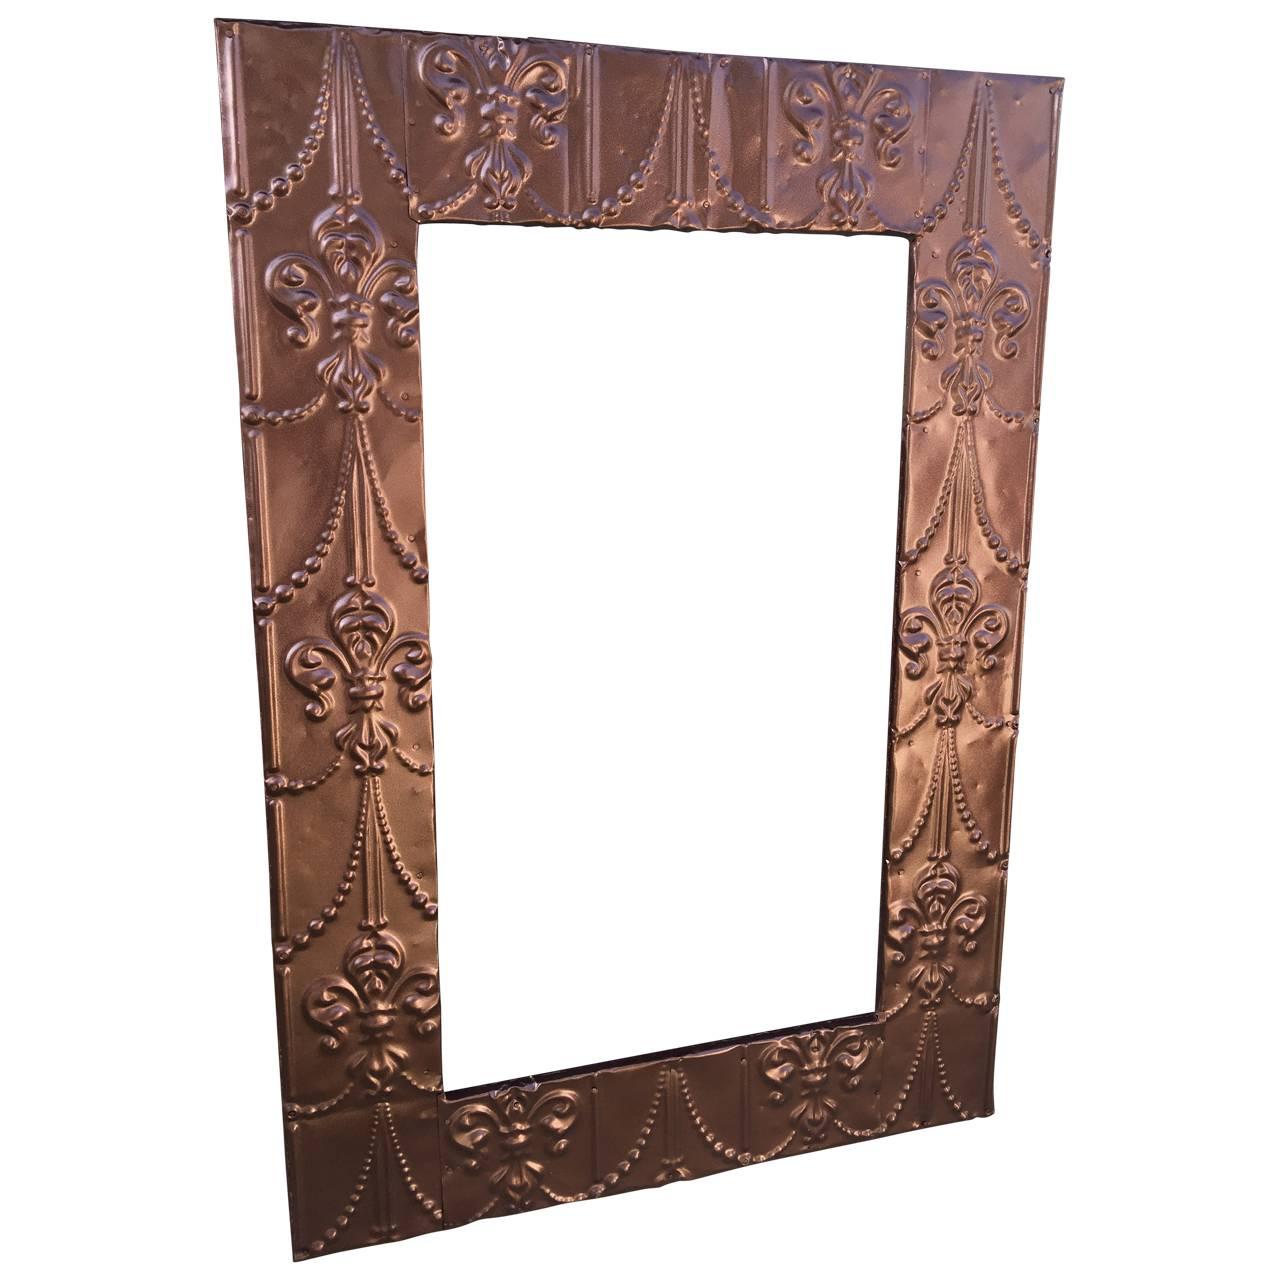 Painted metal wall mirror or it could be used for a cool frame.